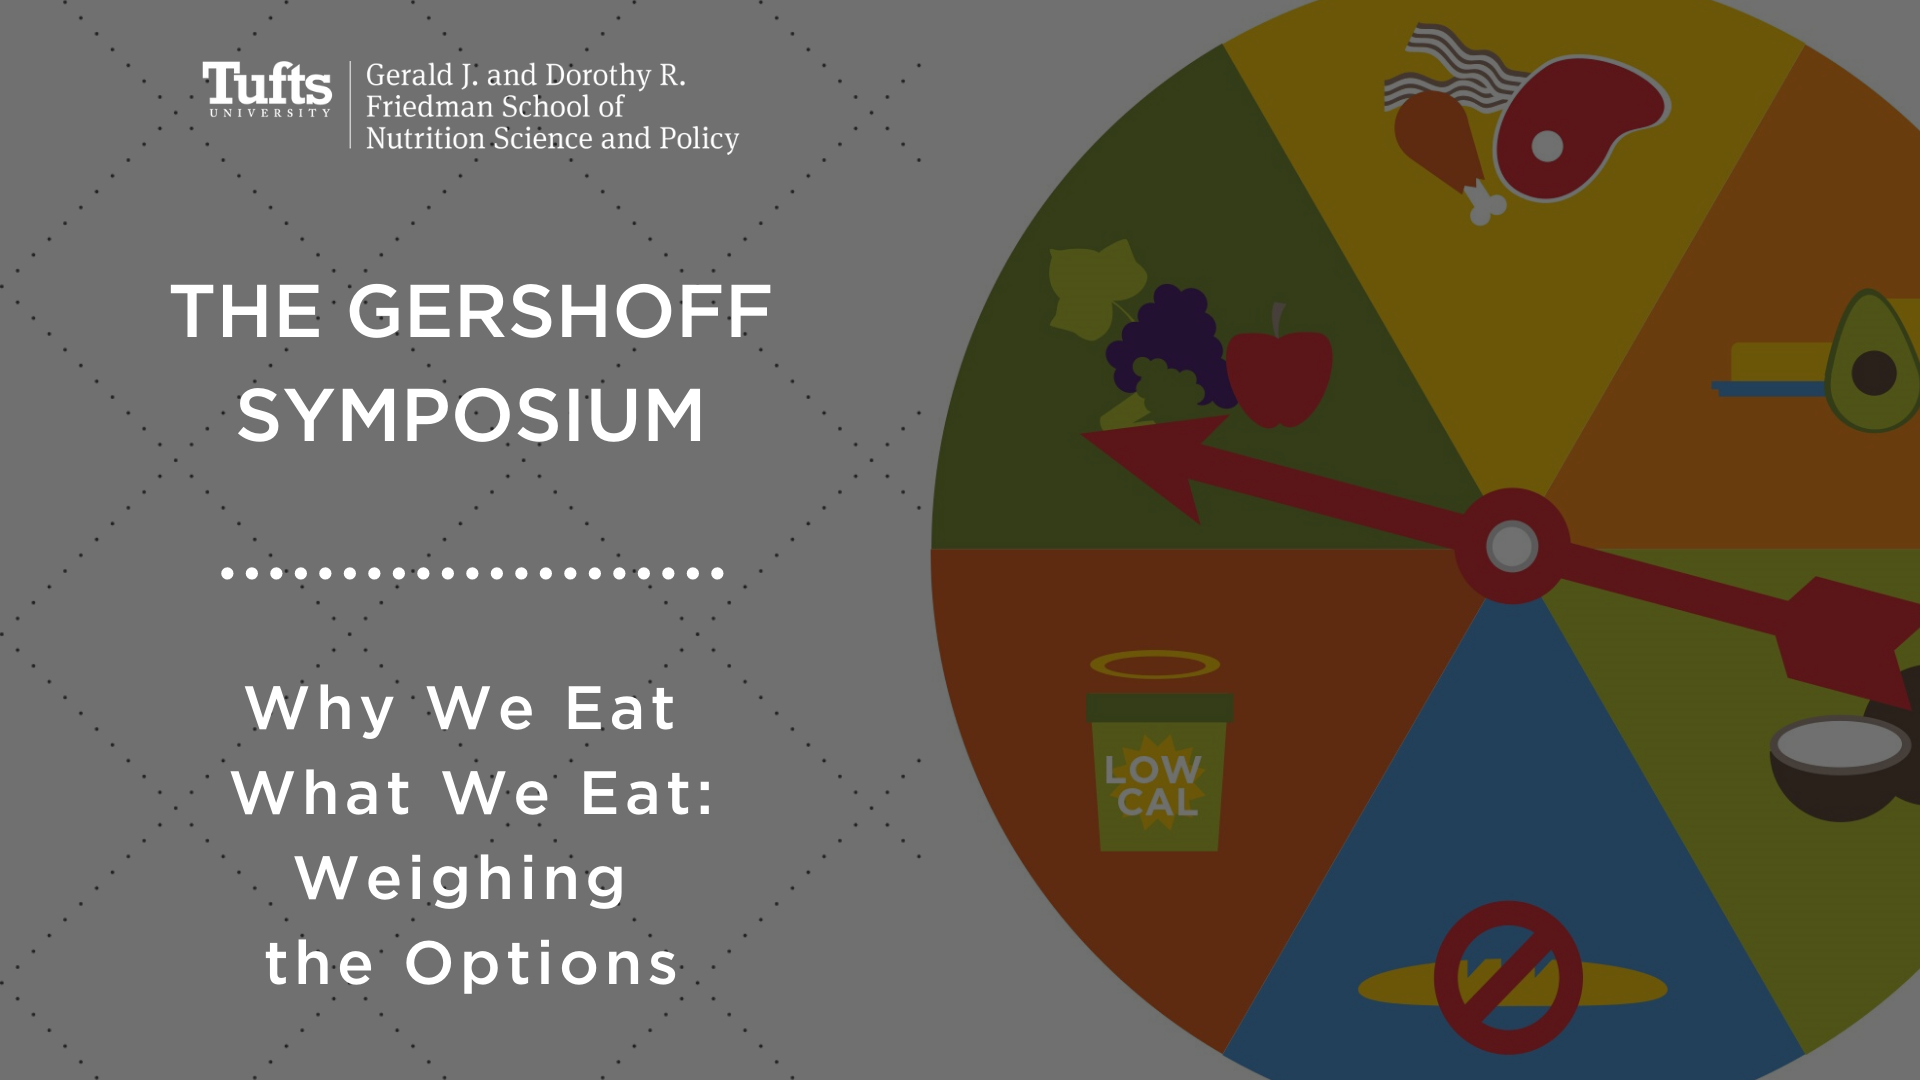 The Gershoff Symposium was titled "Why We Eat What We Eat: Weighing the Options"